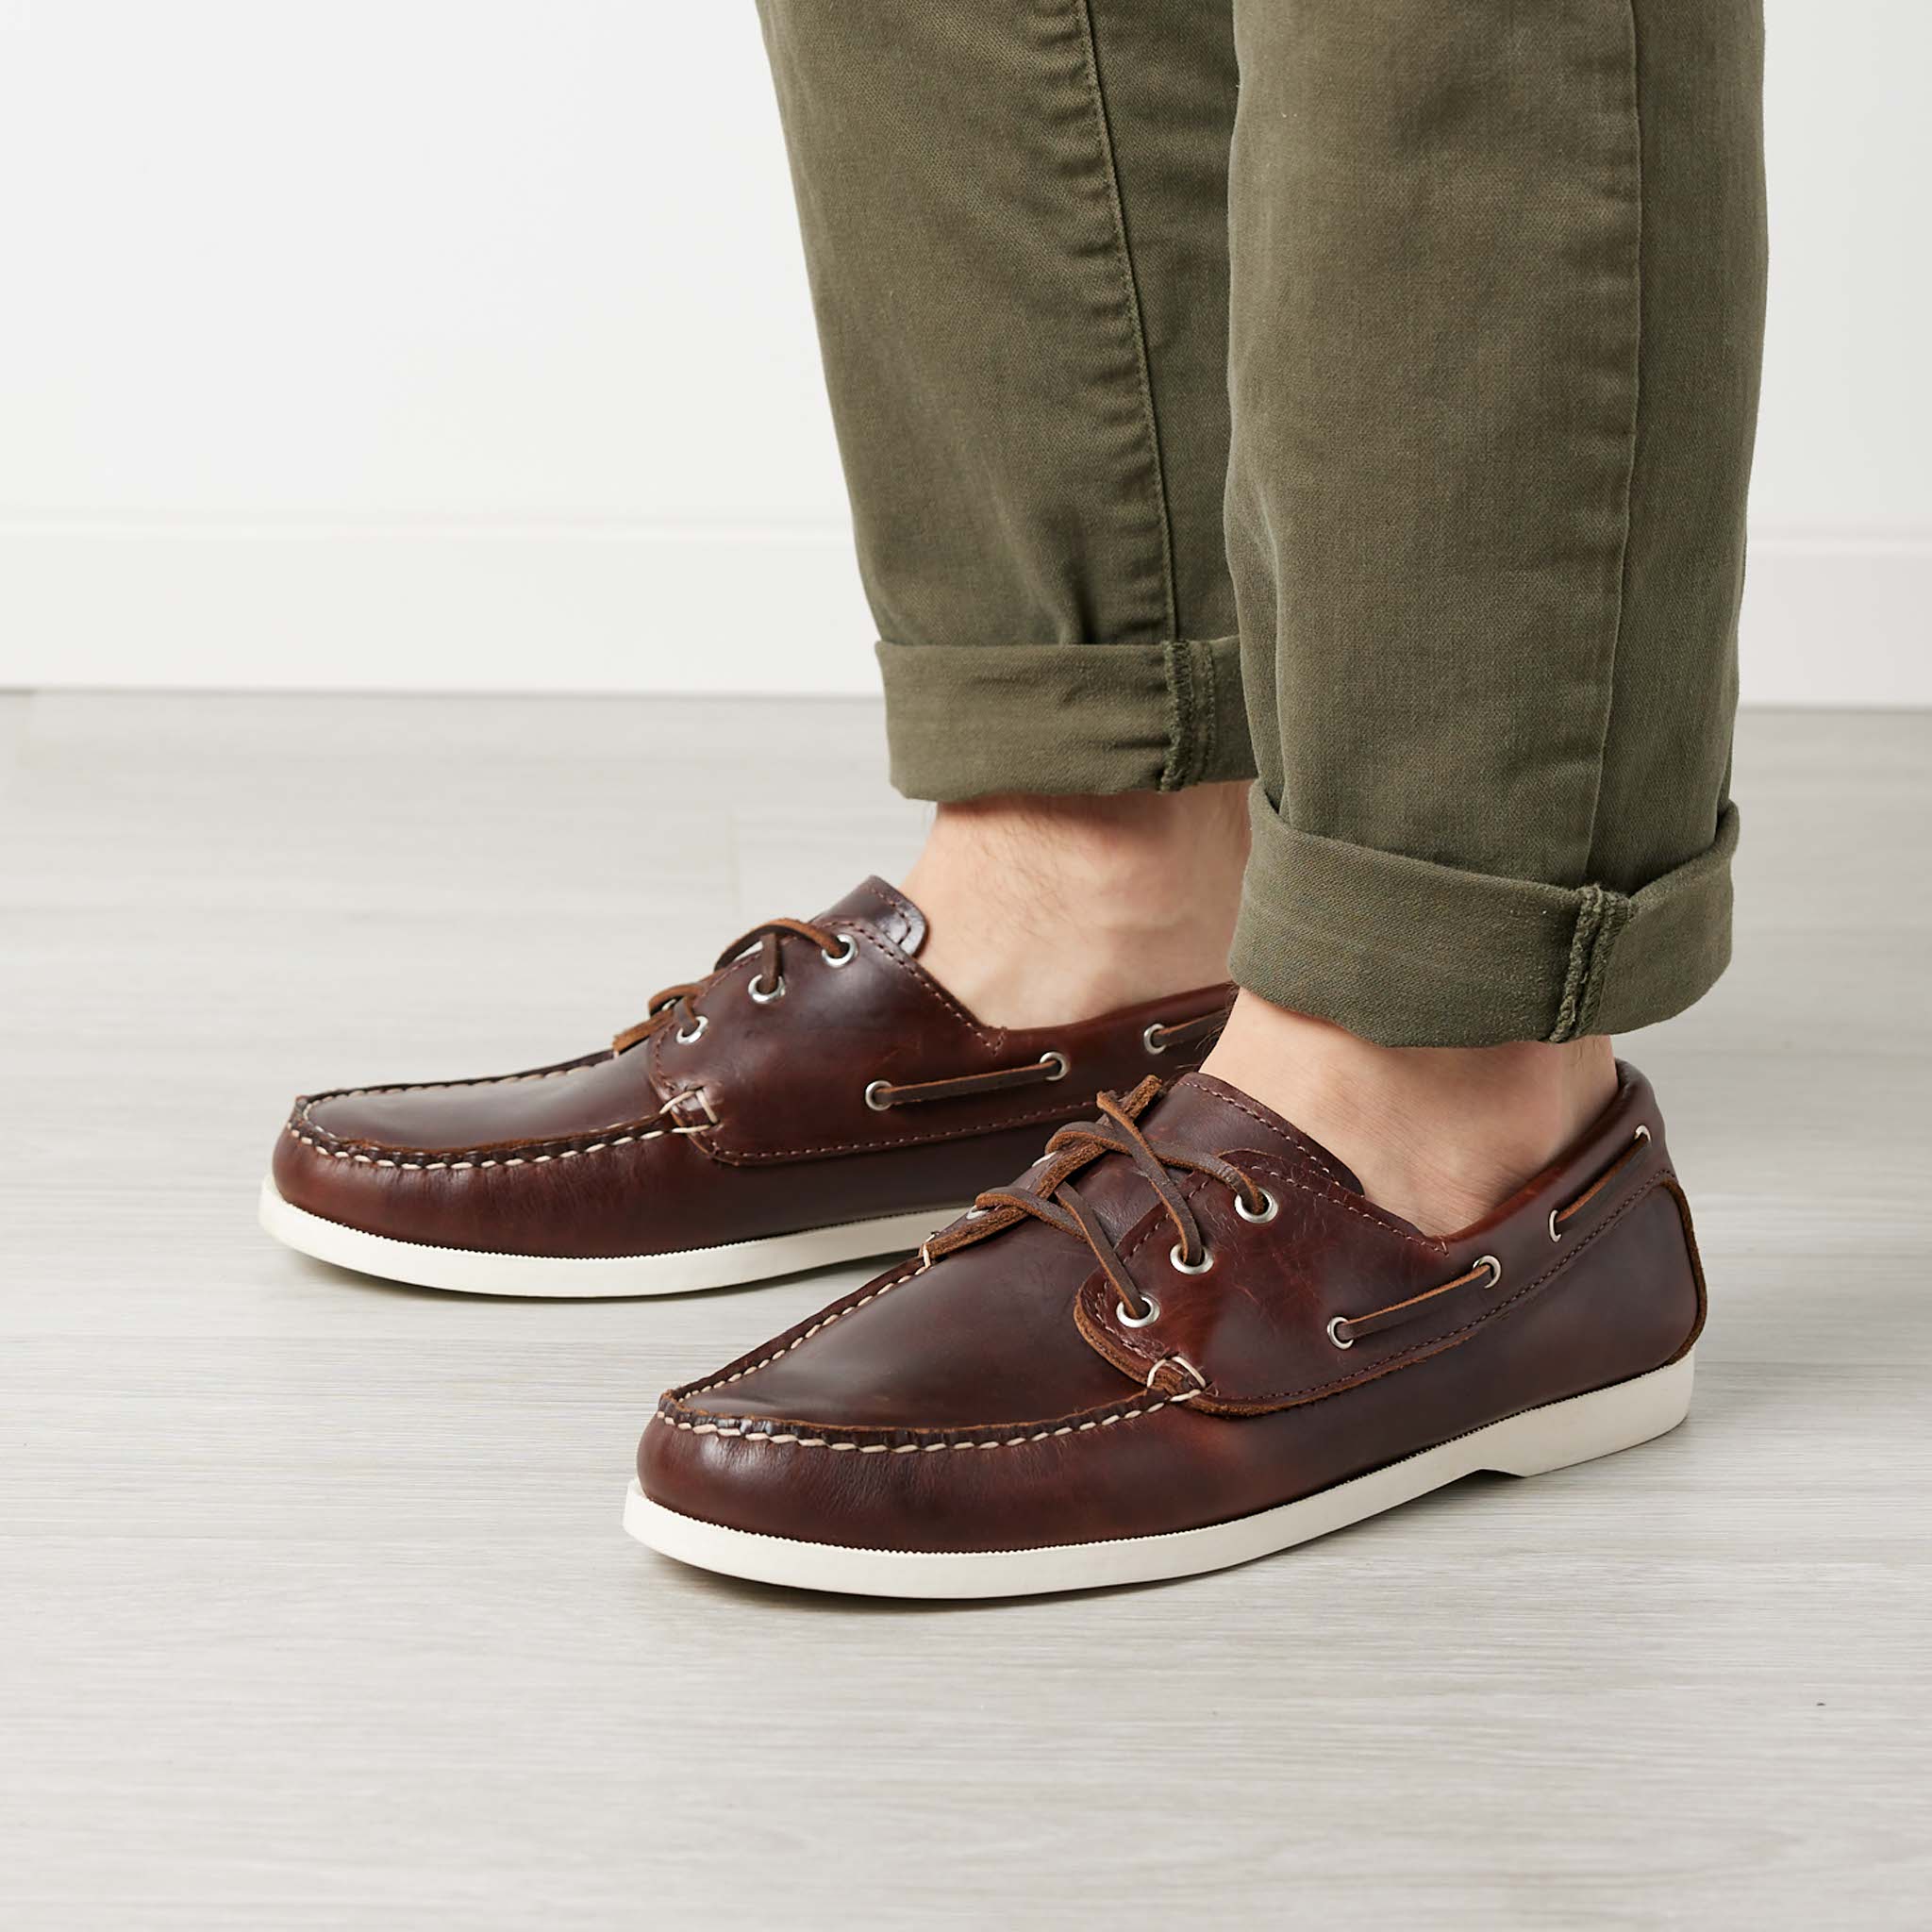 Boat Shoes for Casual Wear